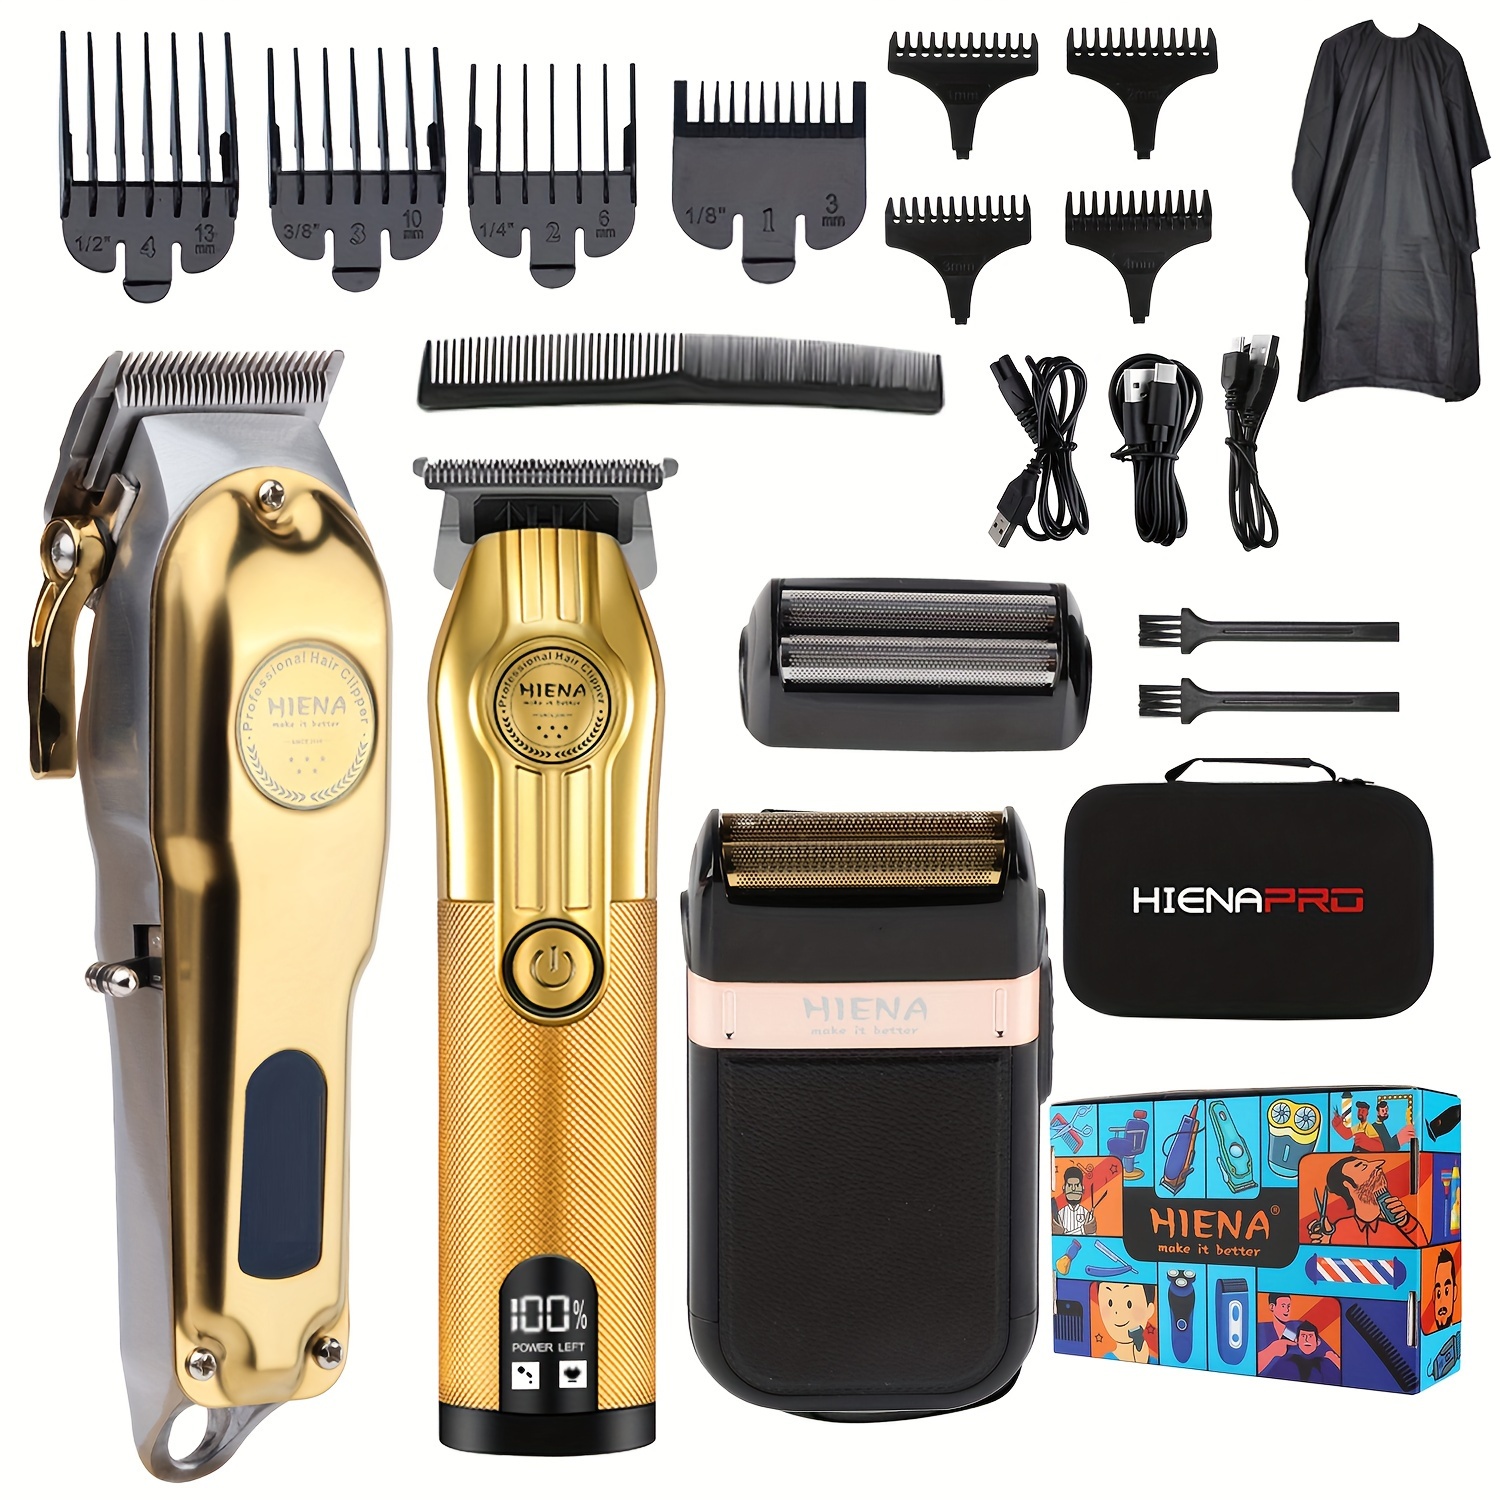 DSP® Professional Barber Clippers Set for Men - Cordless Bald